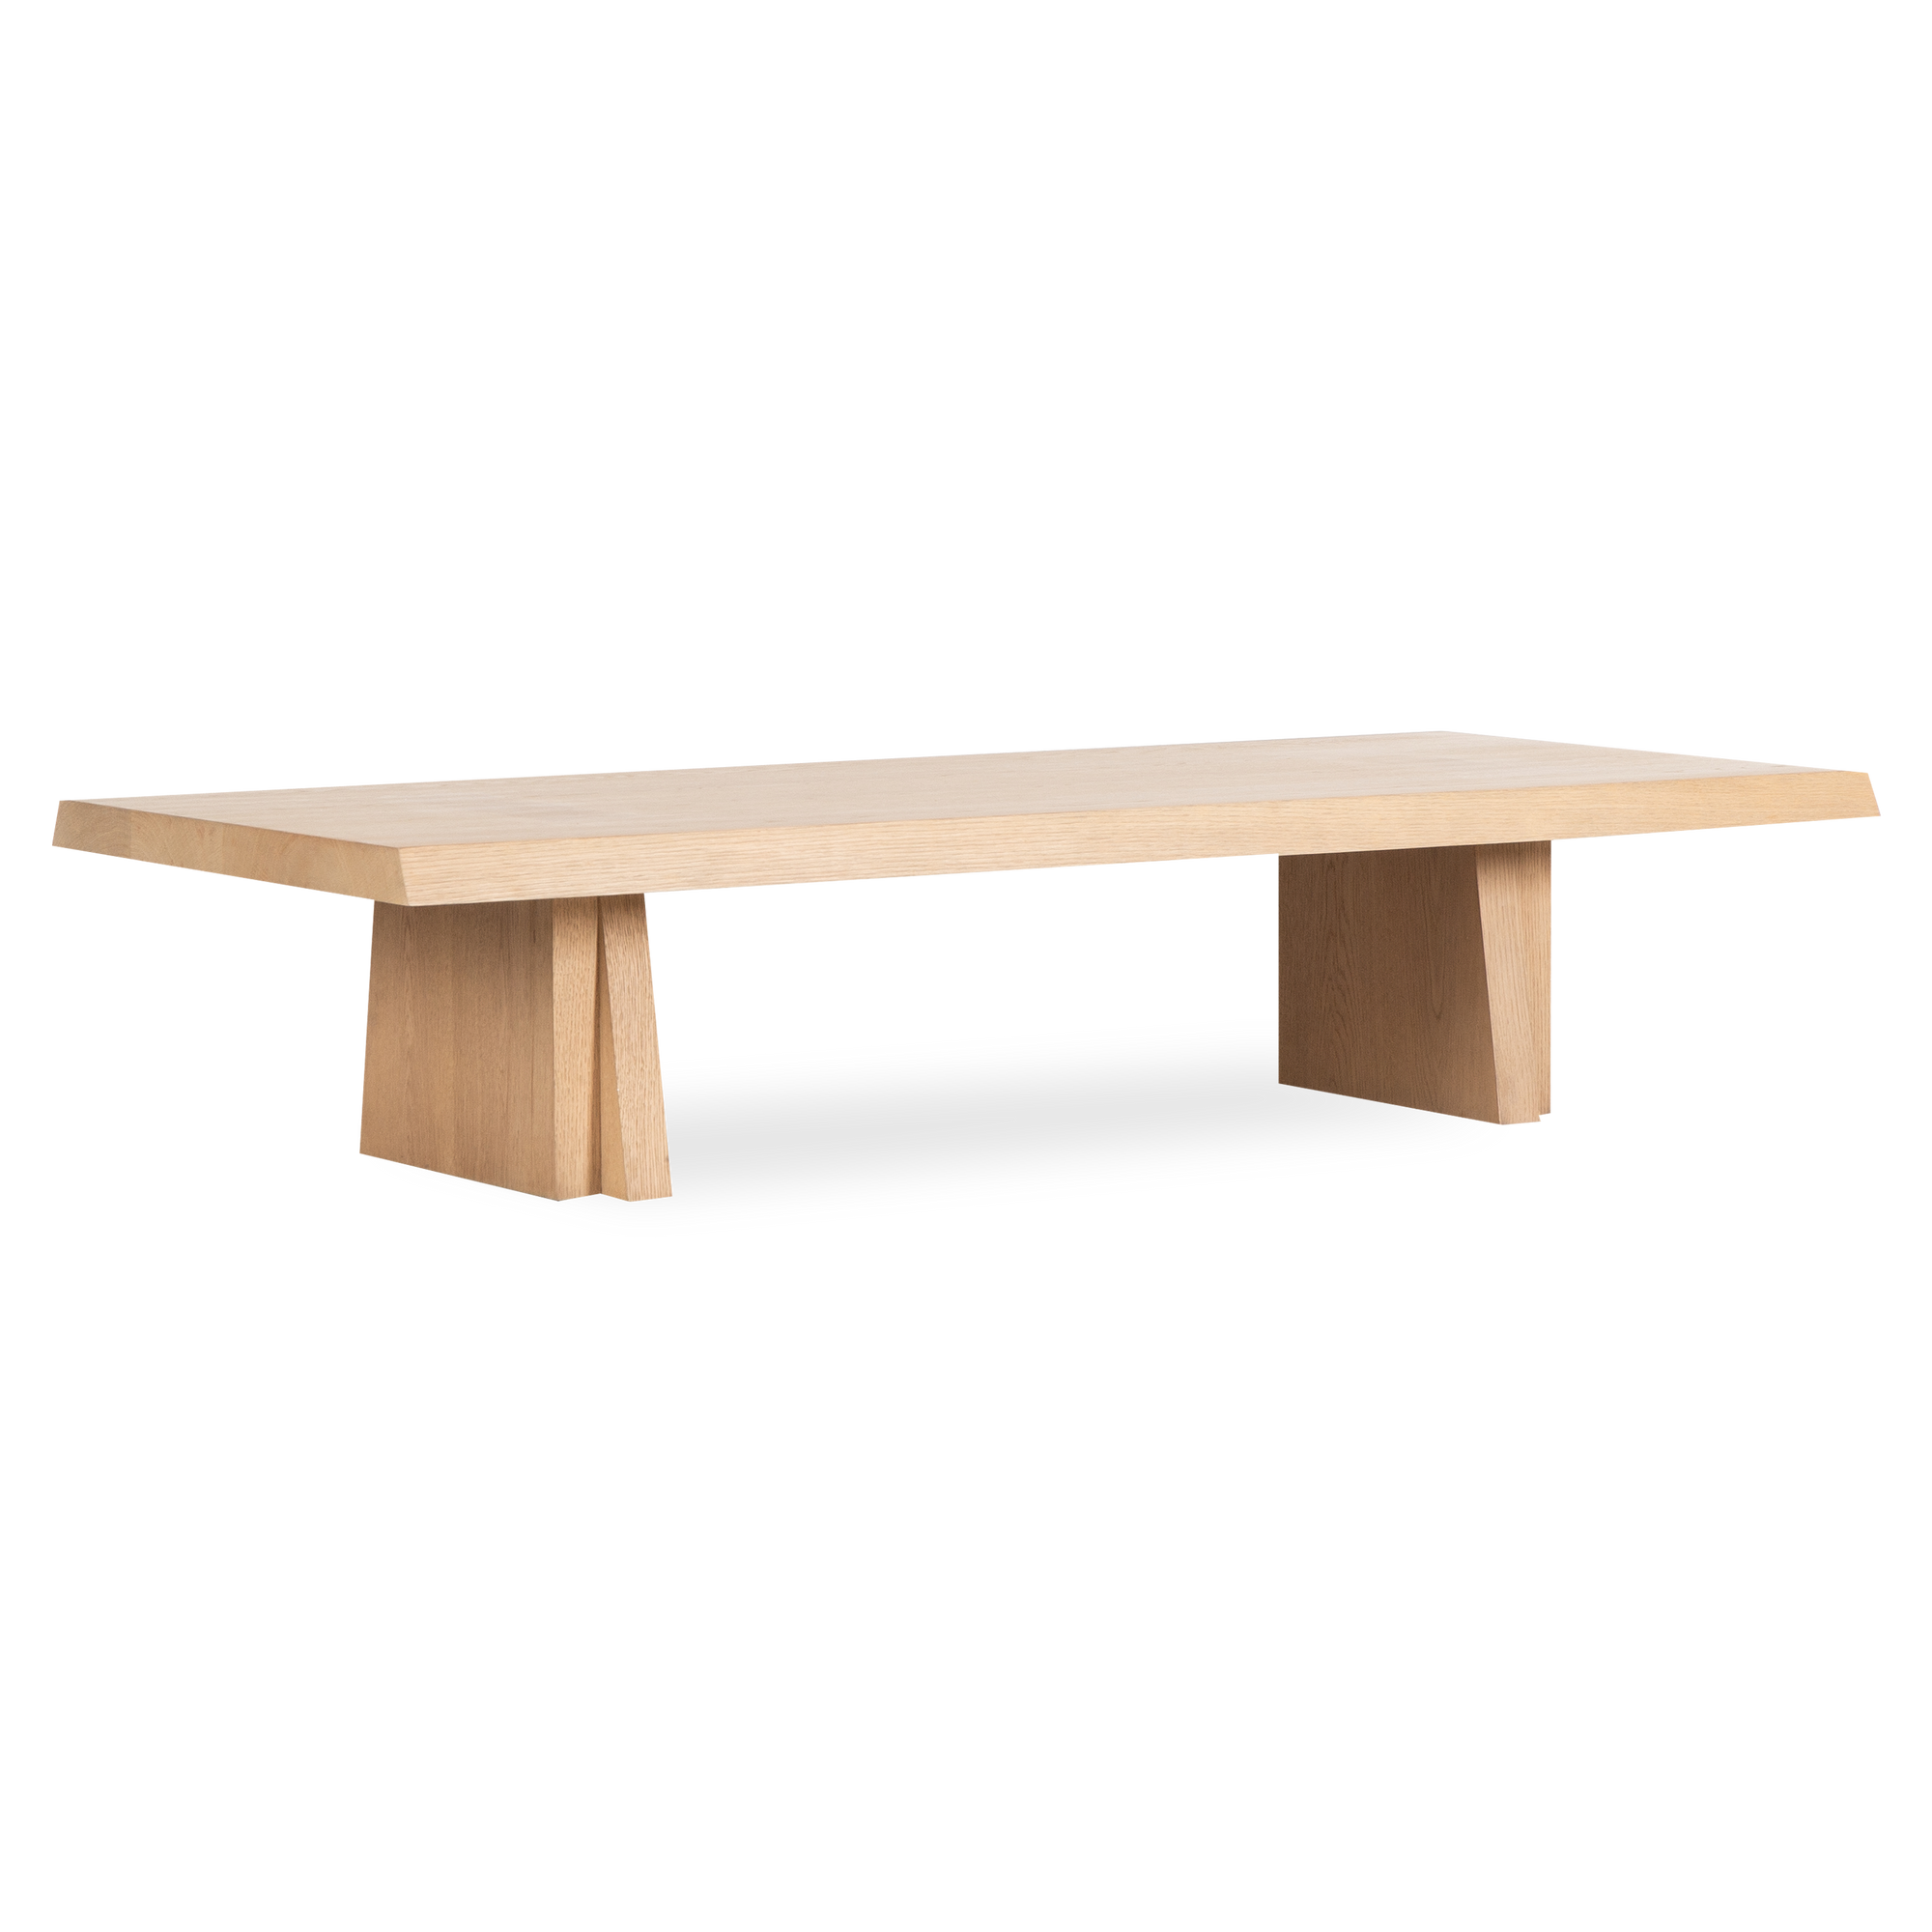 The Oblique Coffee Table draws inspiration from the raw power and geometric precision of 1960s Brutalist architecture.